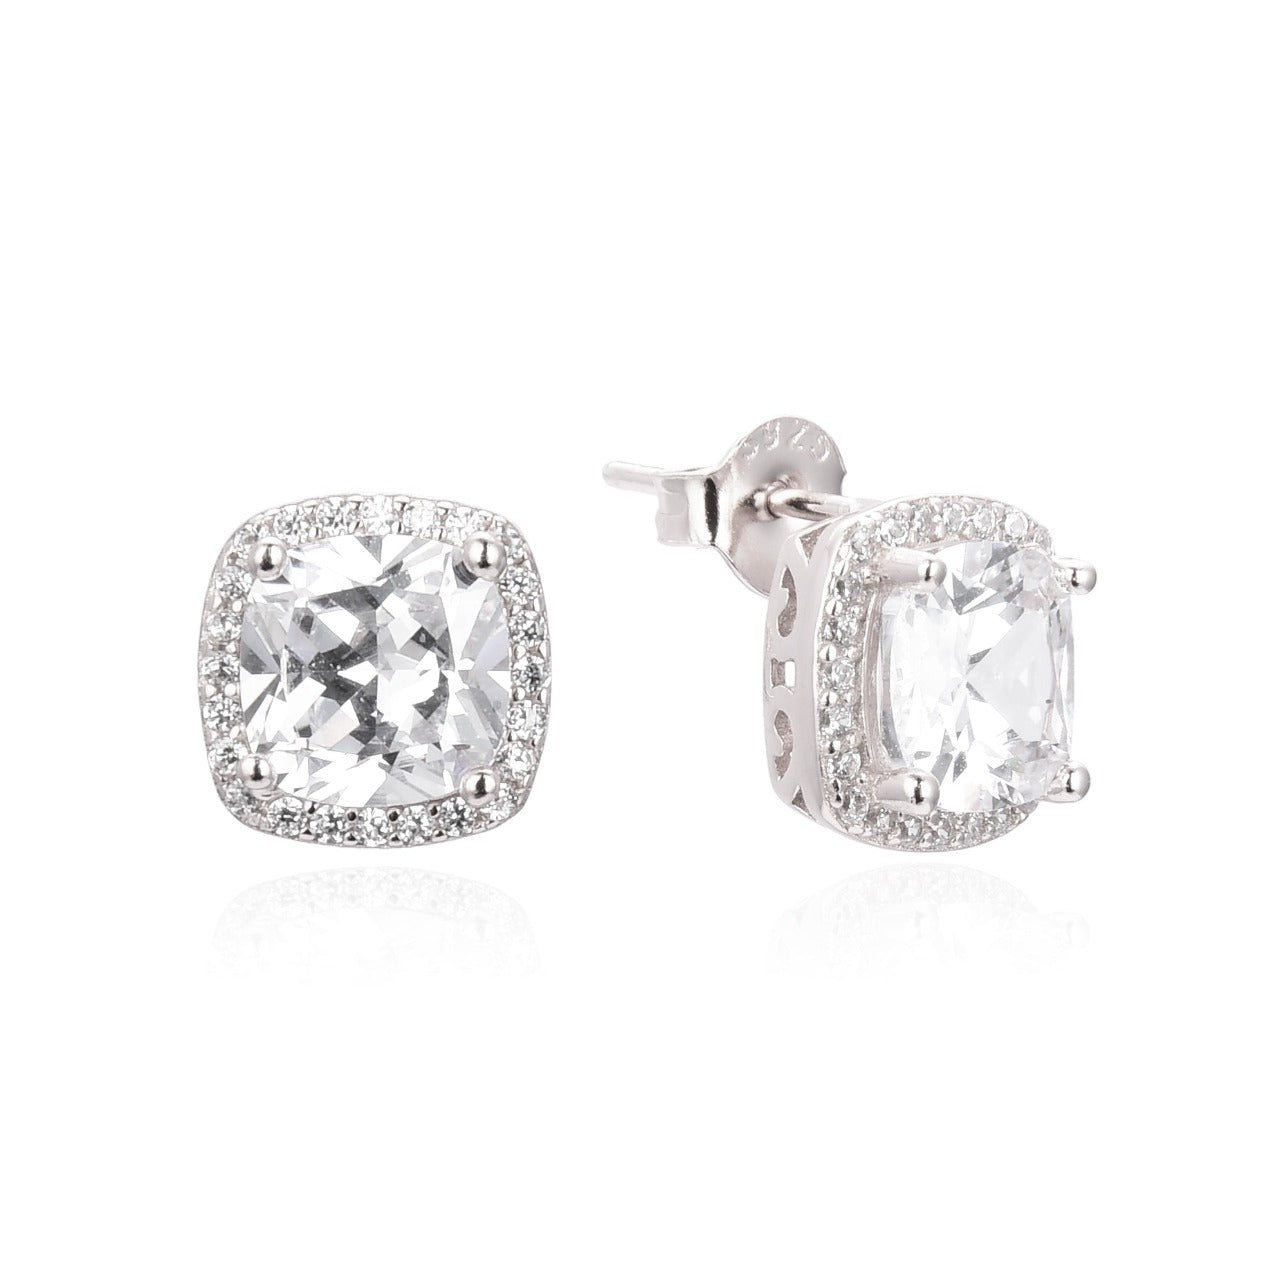 Sterling Silver Square Halo Stud Earrings by Kilkenny Silver   Sterling silver square halo stud earrings with cubic zirconia stones.